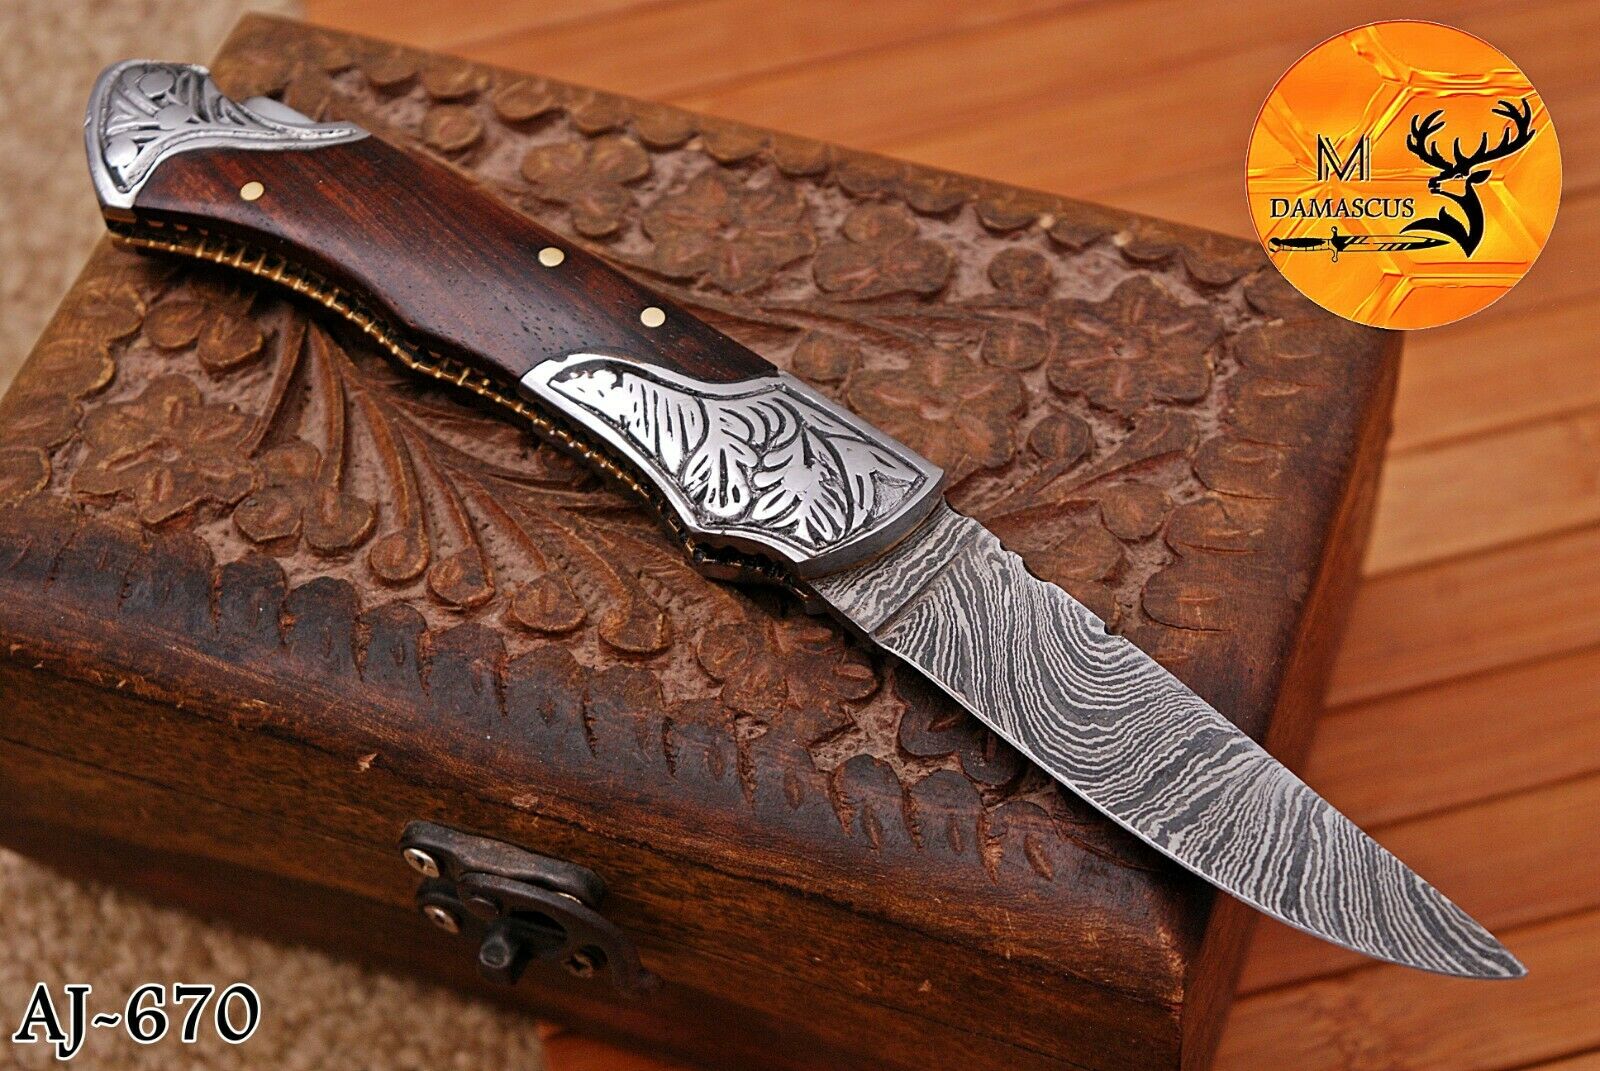 Hand Forged Damascus Steel Folding Pocket Knife With Wood Handle - Aj 670